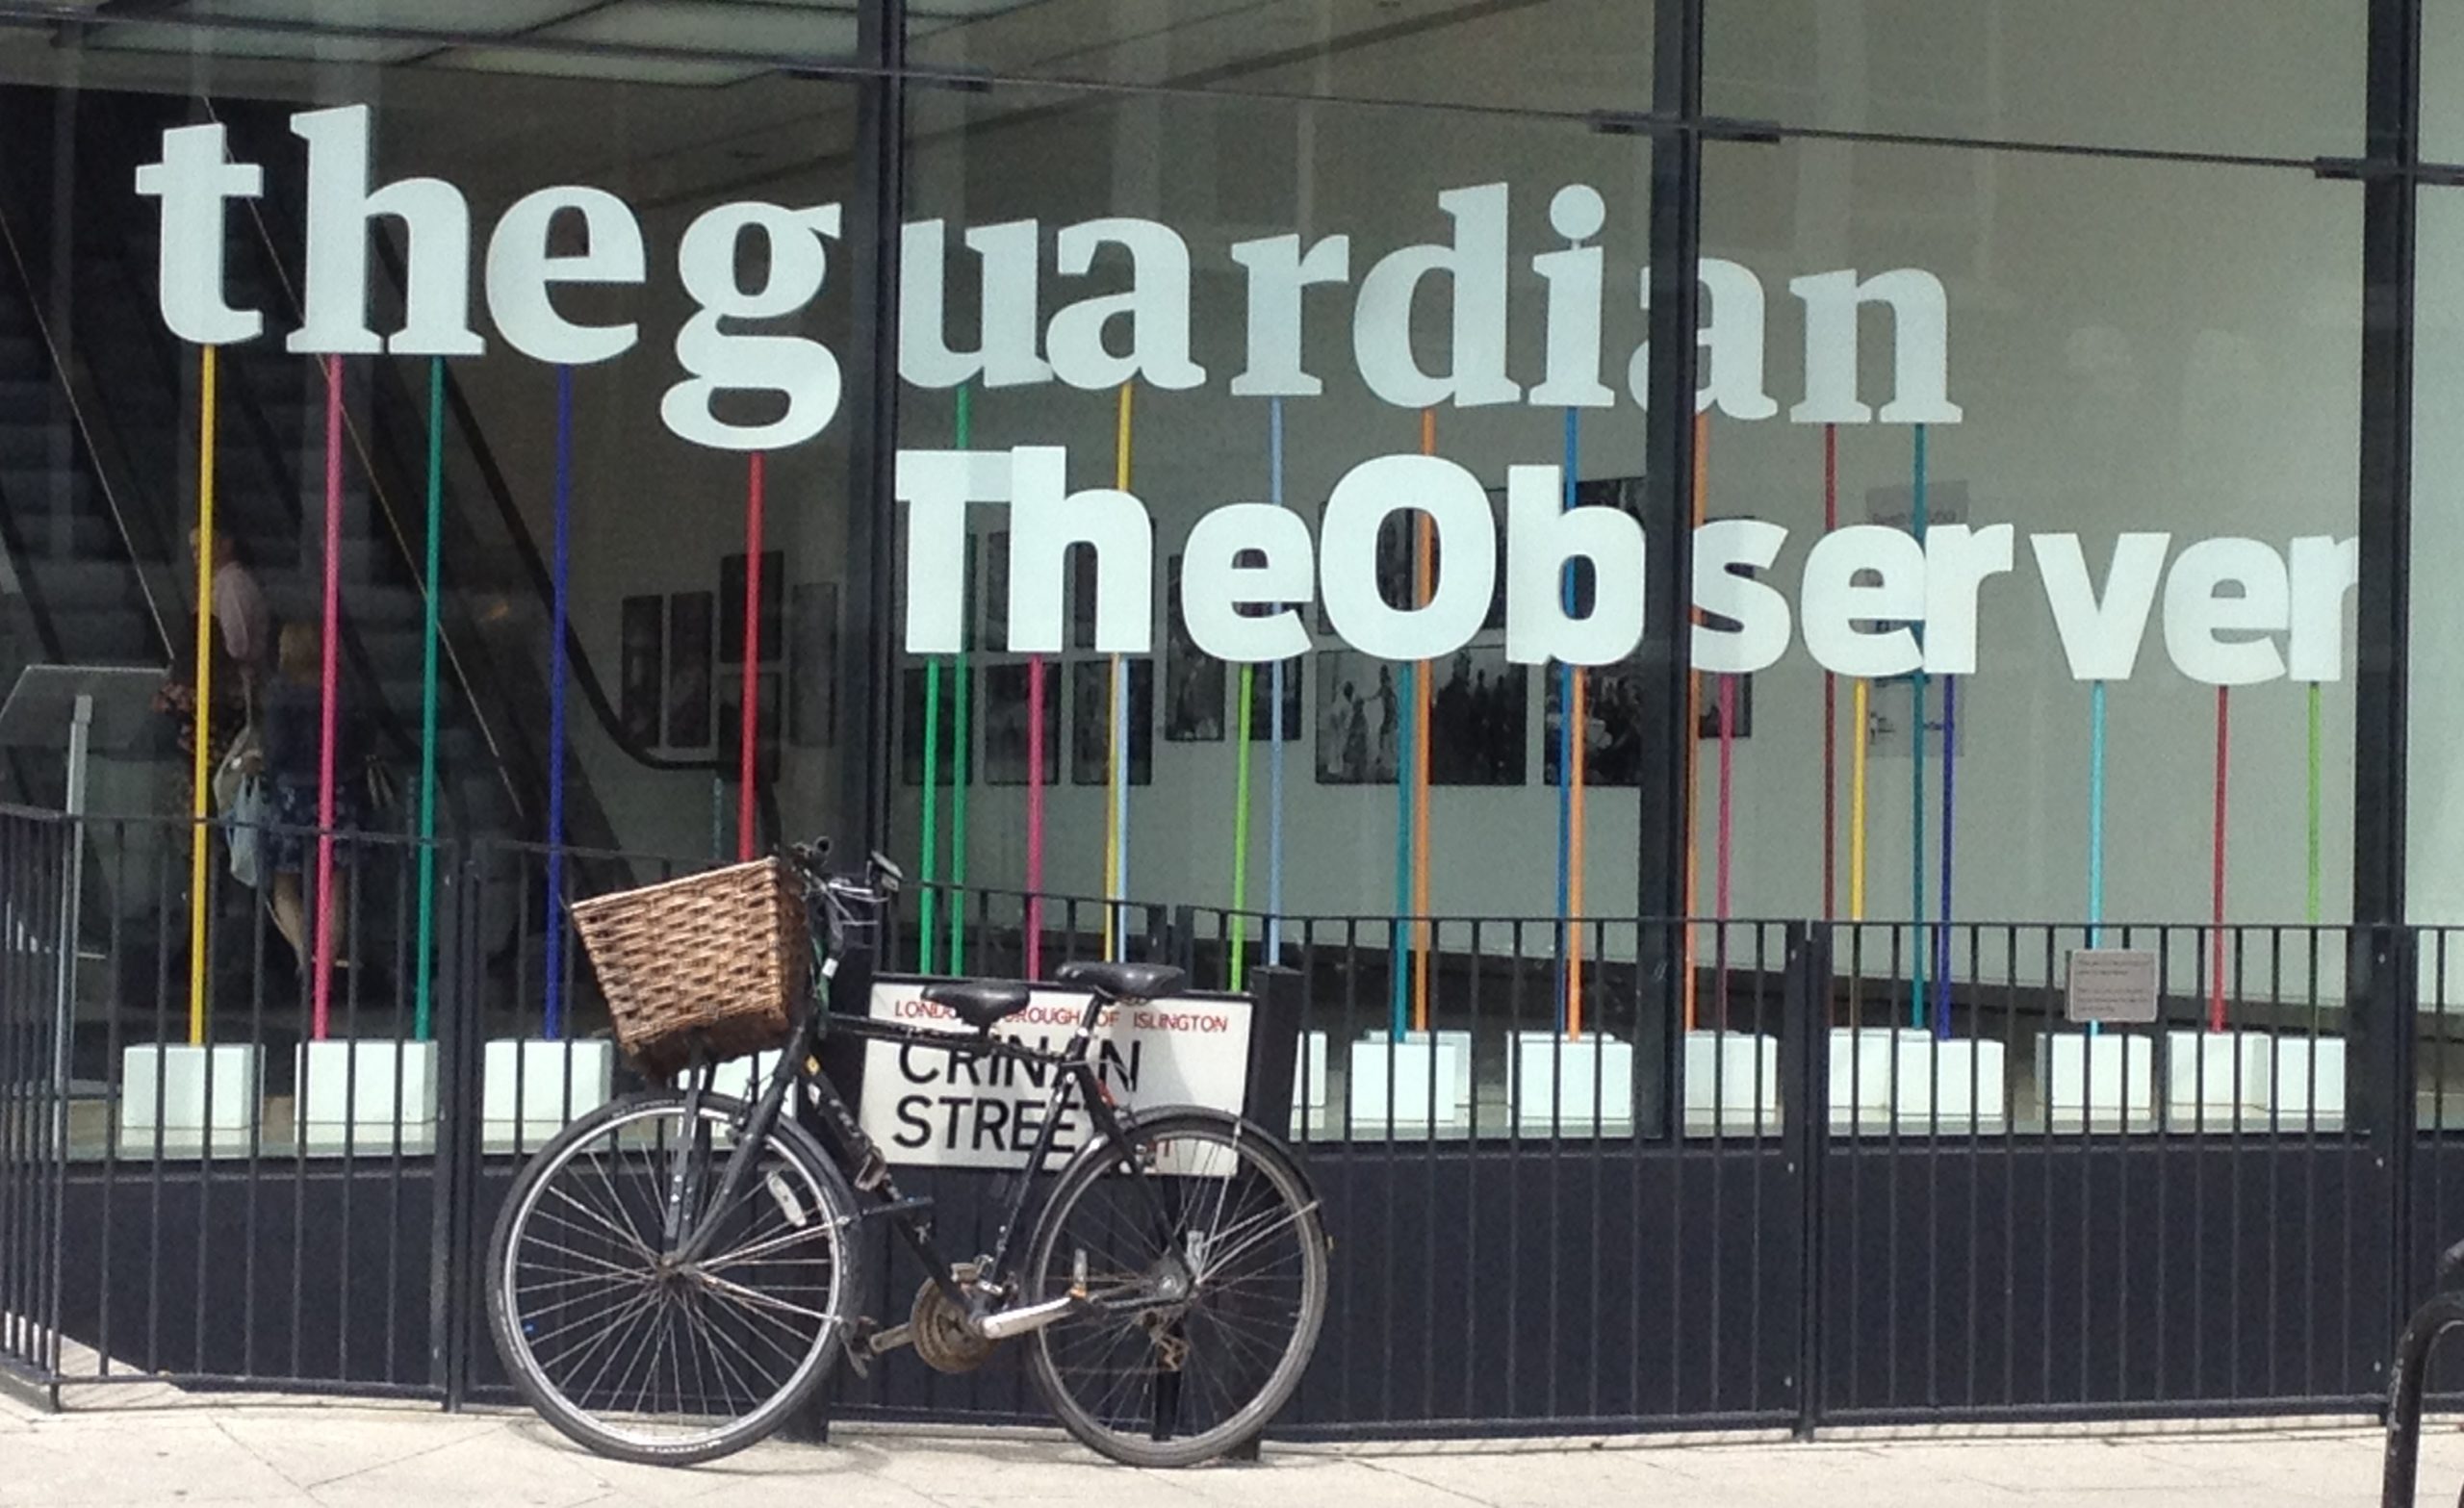 The Guardian/The Observer building in London, where Nick Cohen has been suspended from. It shows their logos in the window with a bicycle chained to the street sign out front.